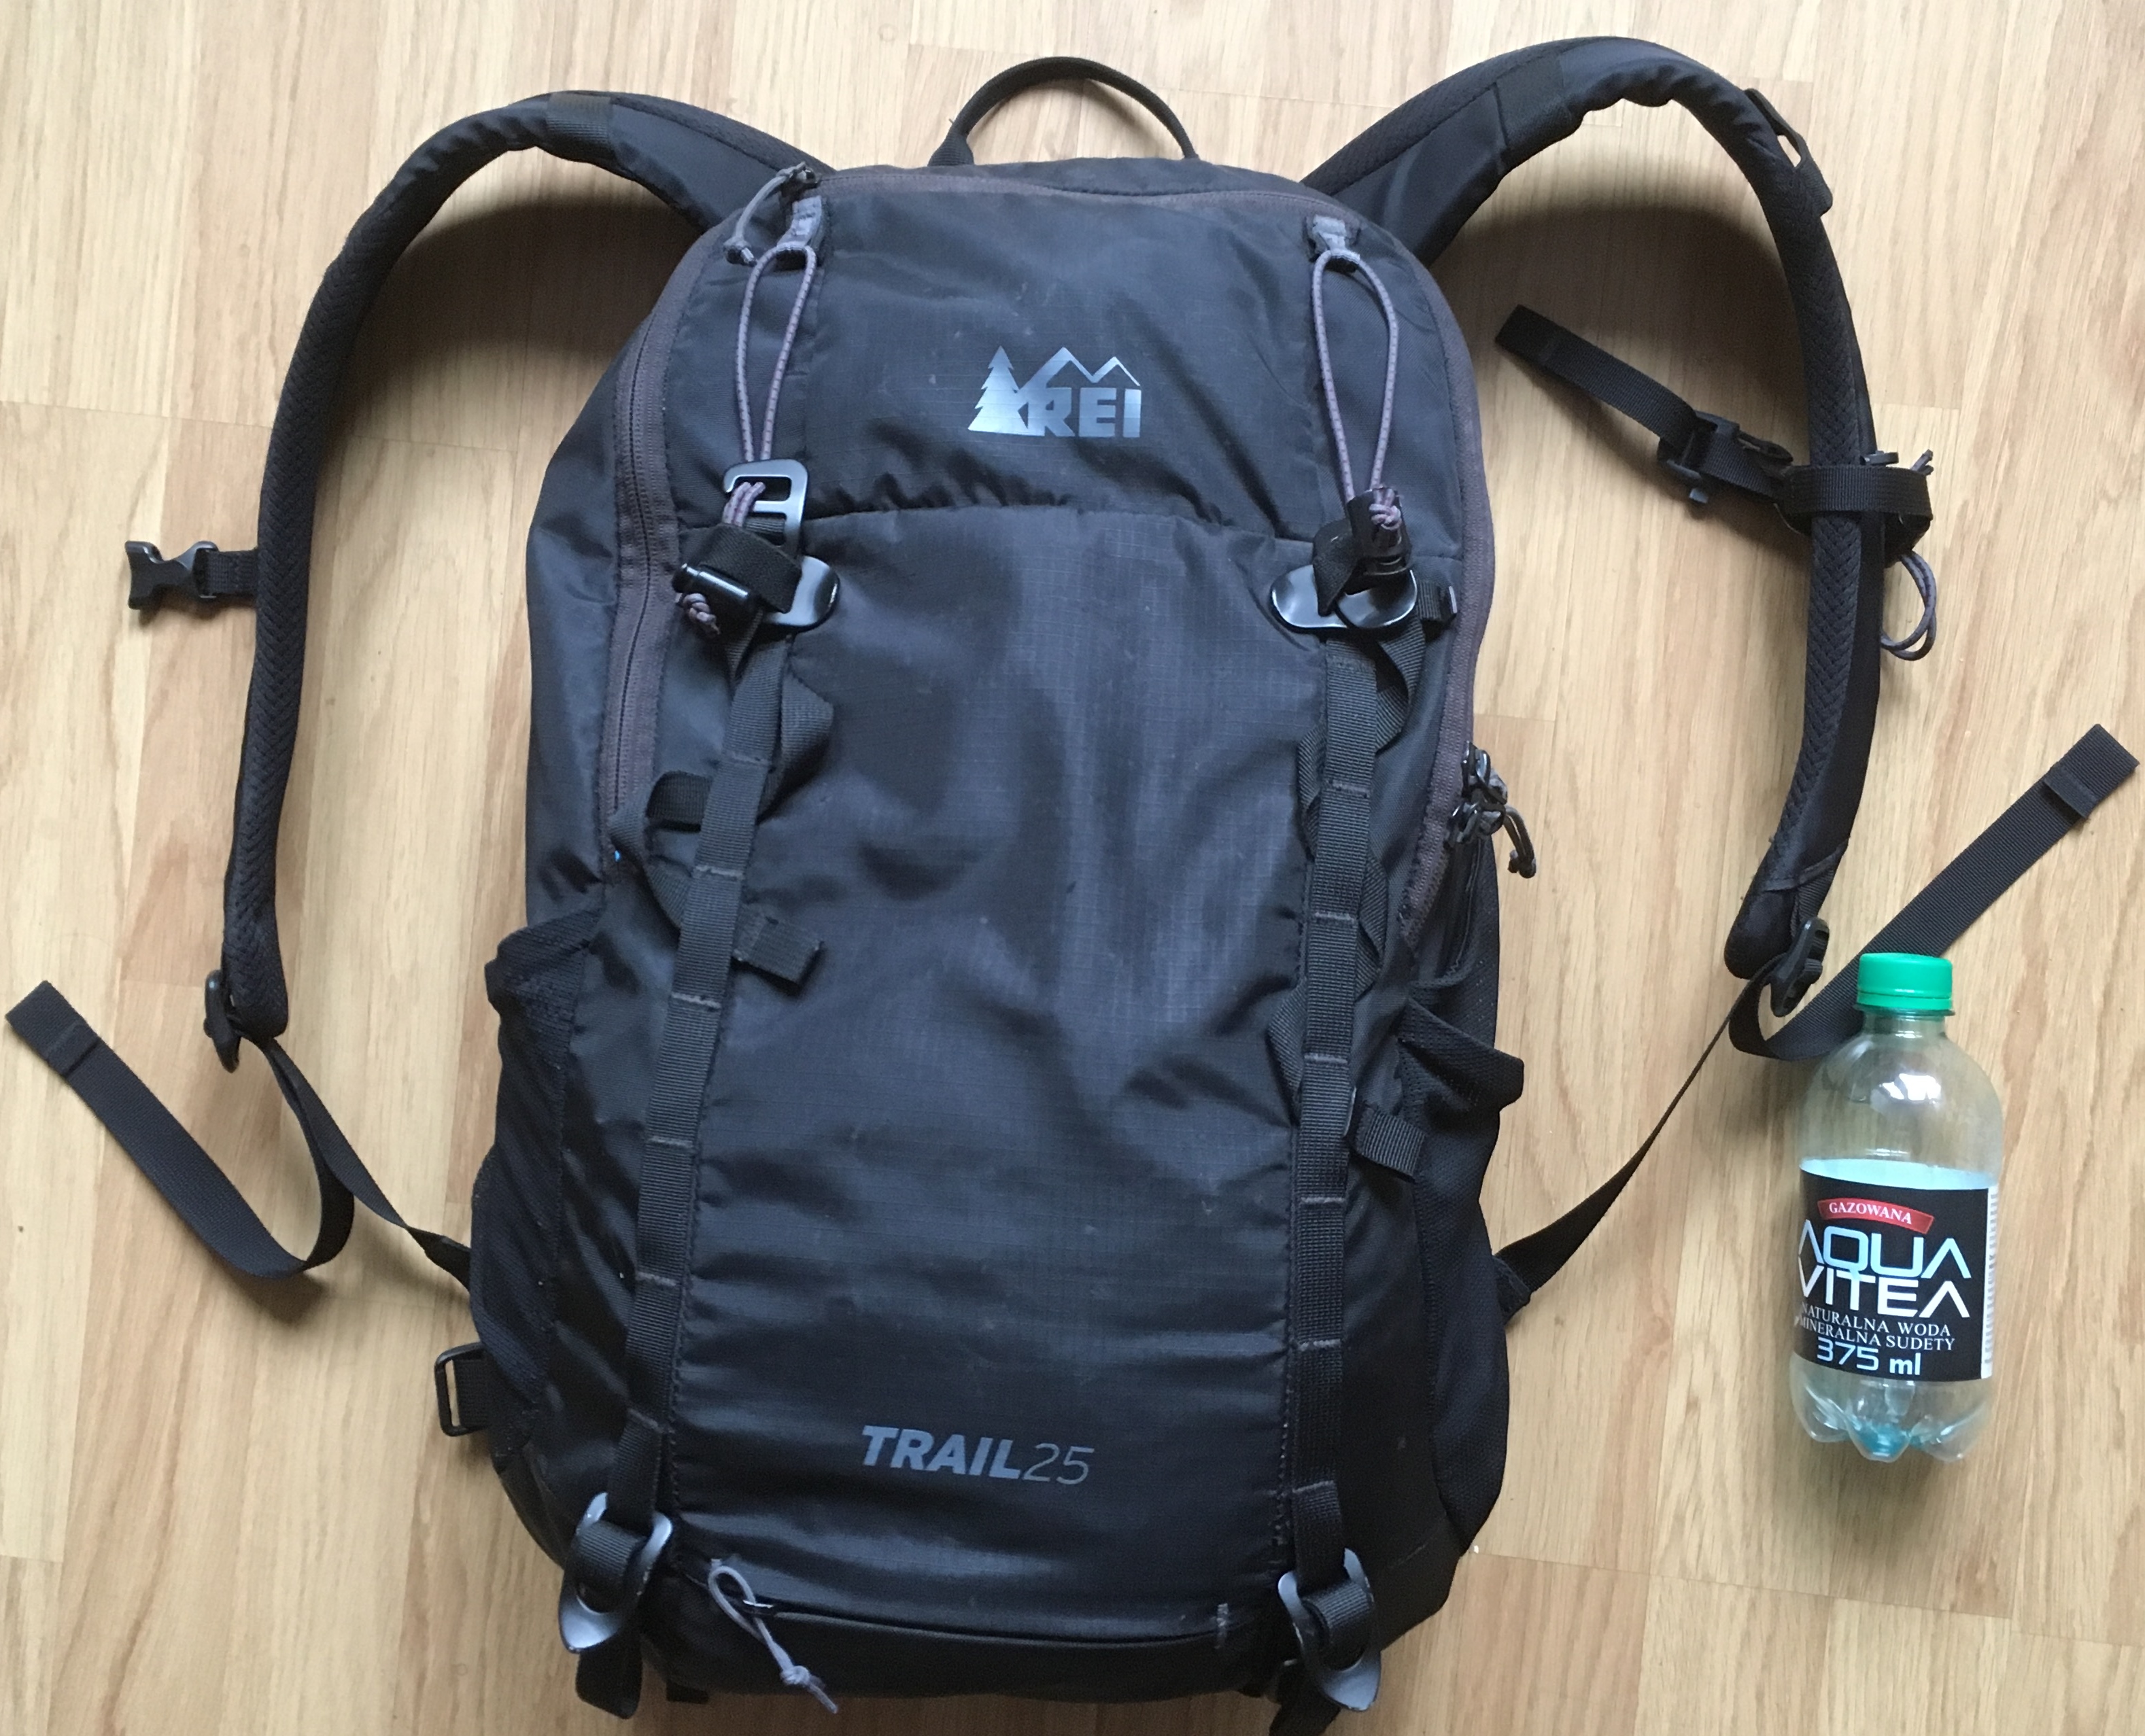 Backpack - minimalist packing for teacher training course and retreat in Rishikesh India